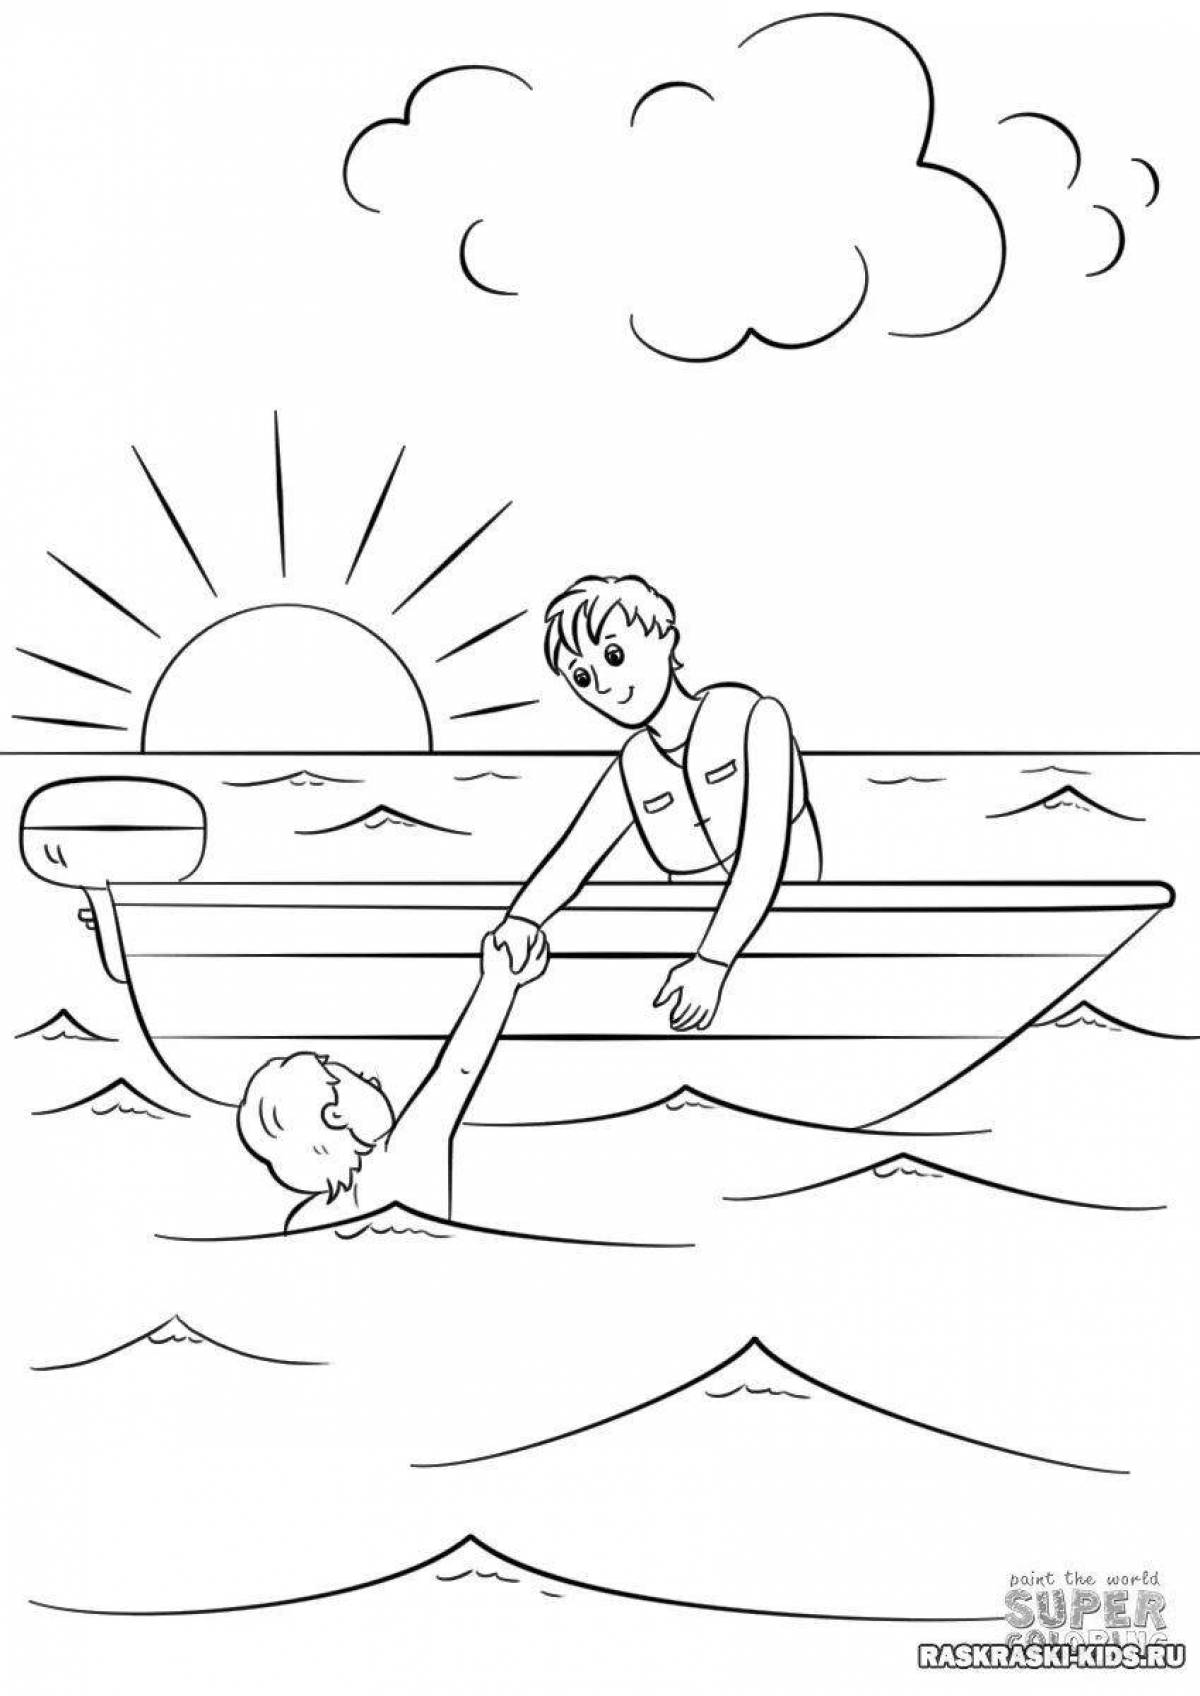 Interesting water safety coloring page